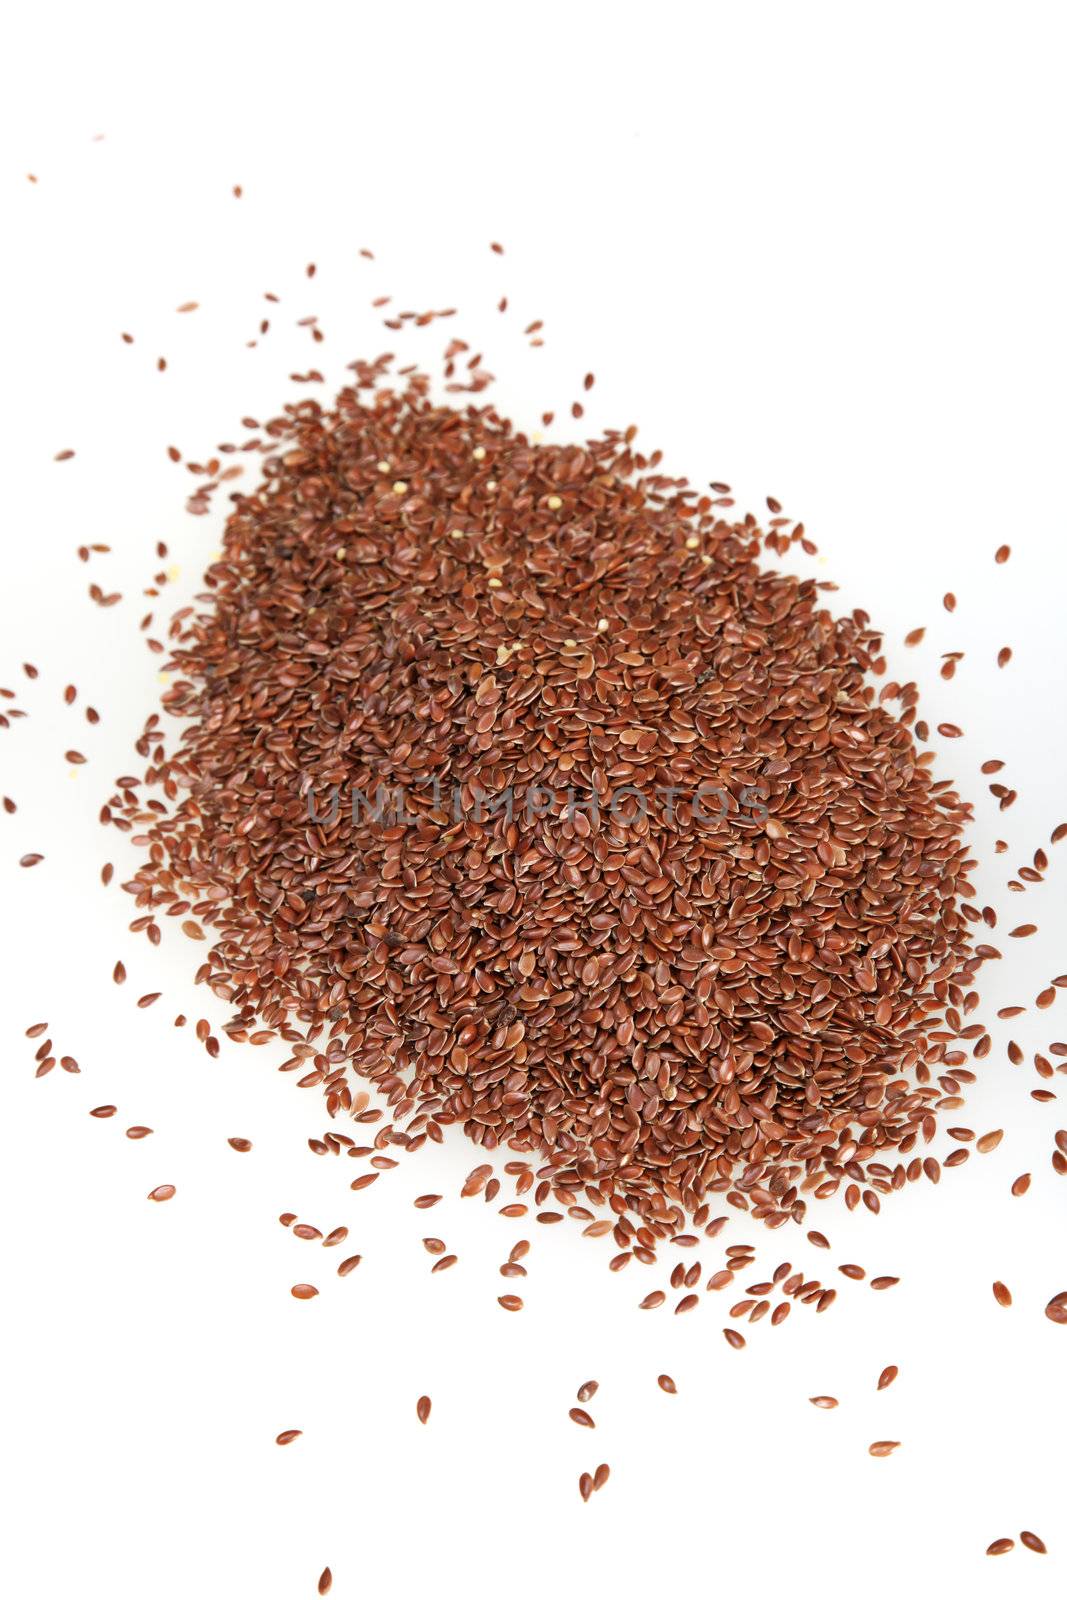 Photograph of flinseed in brown color on white background. Photograph of food grains in brown color on white background.